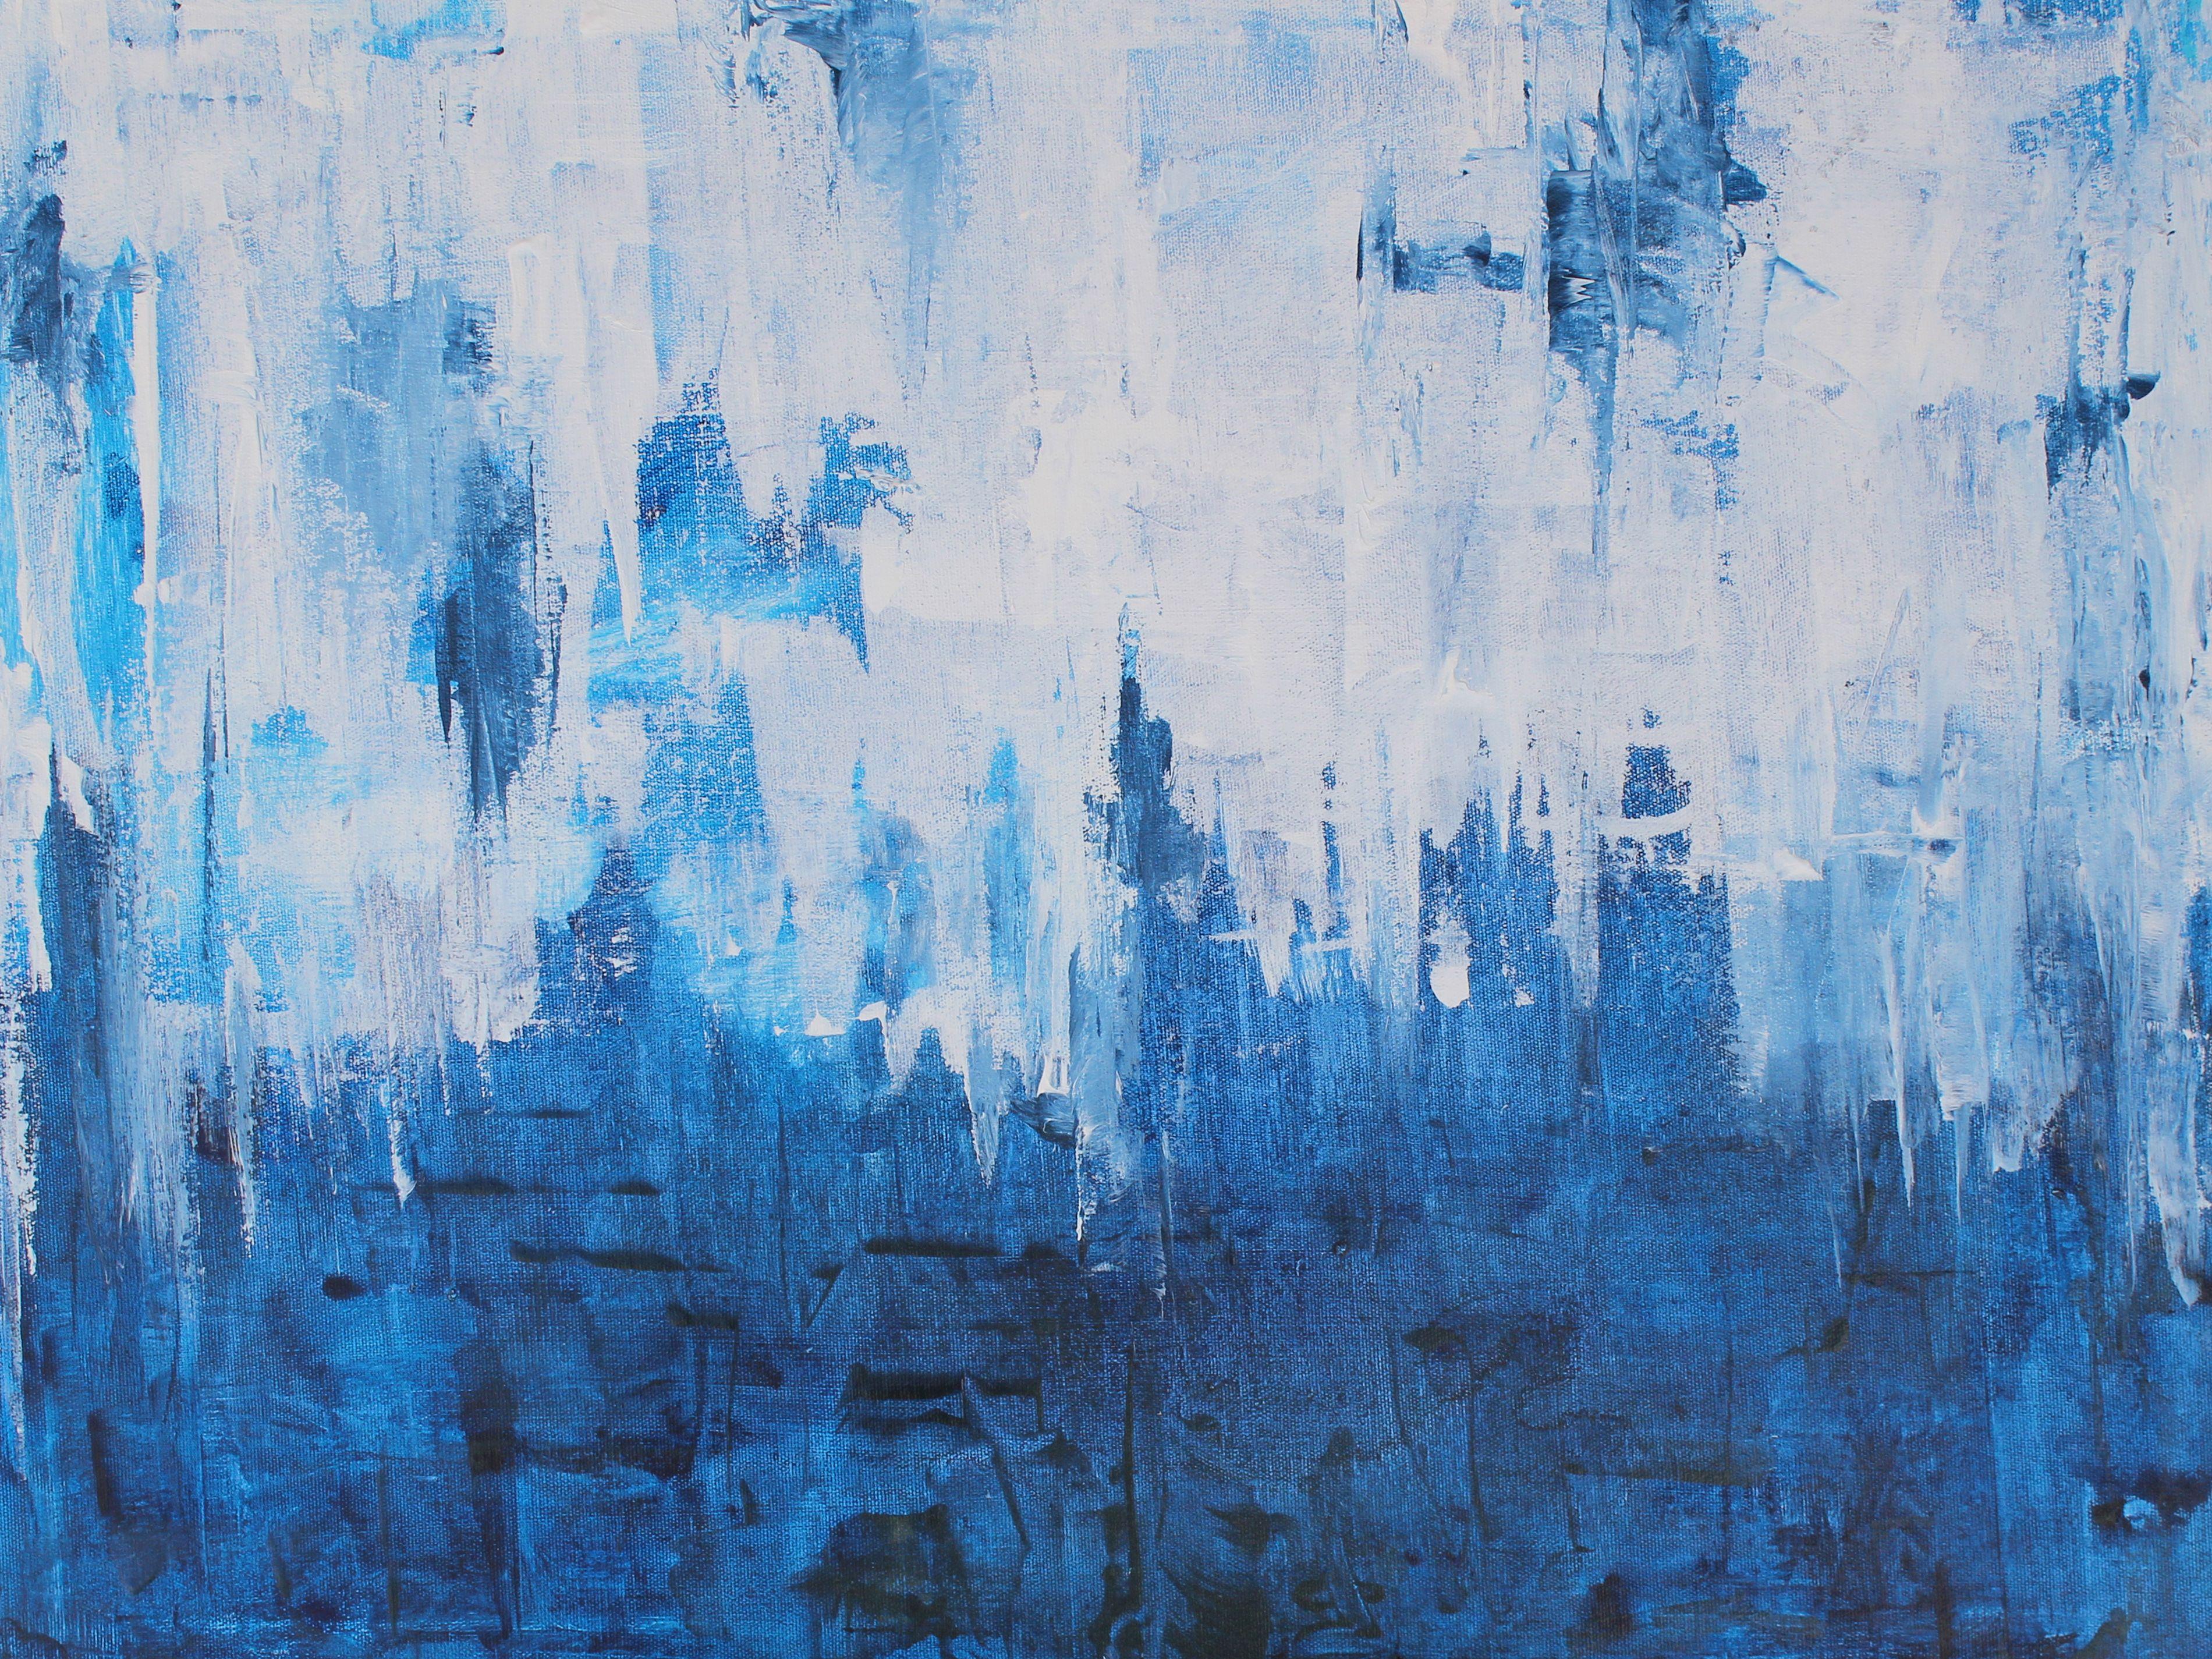 KR Moehr Abstract Painting - Blue Jazz, Painting, Acrylic on Canvas